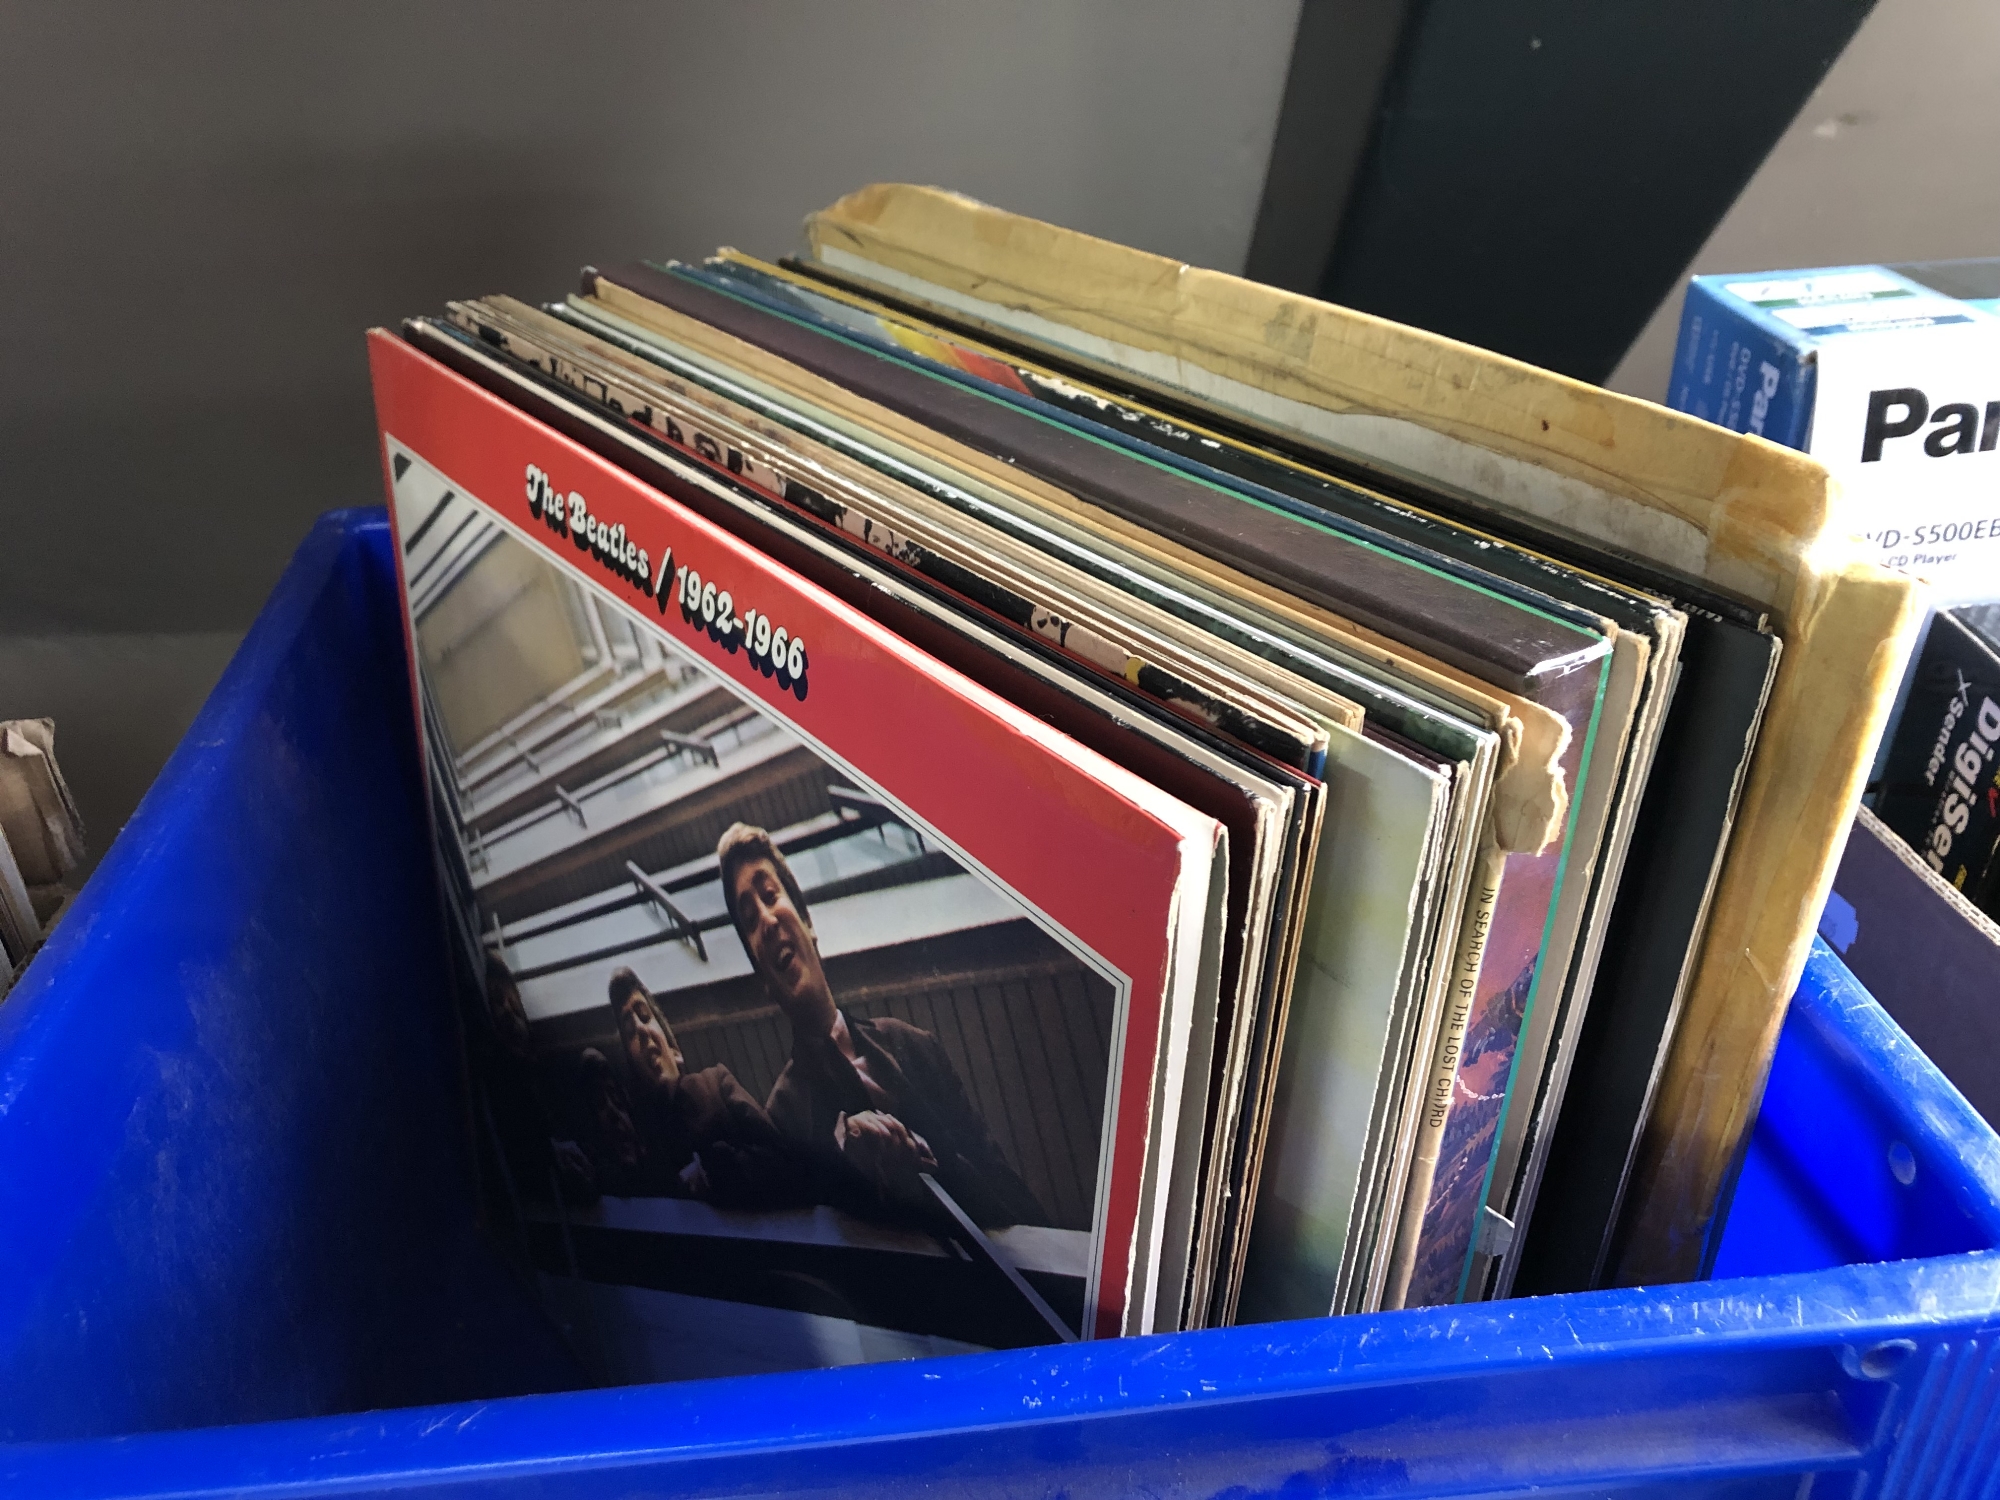 A box of vinyl records including The Beatles,